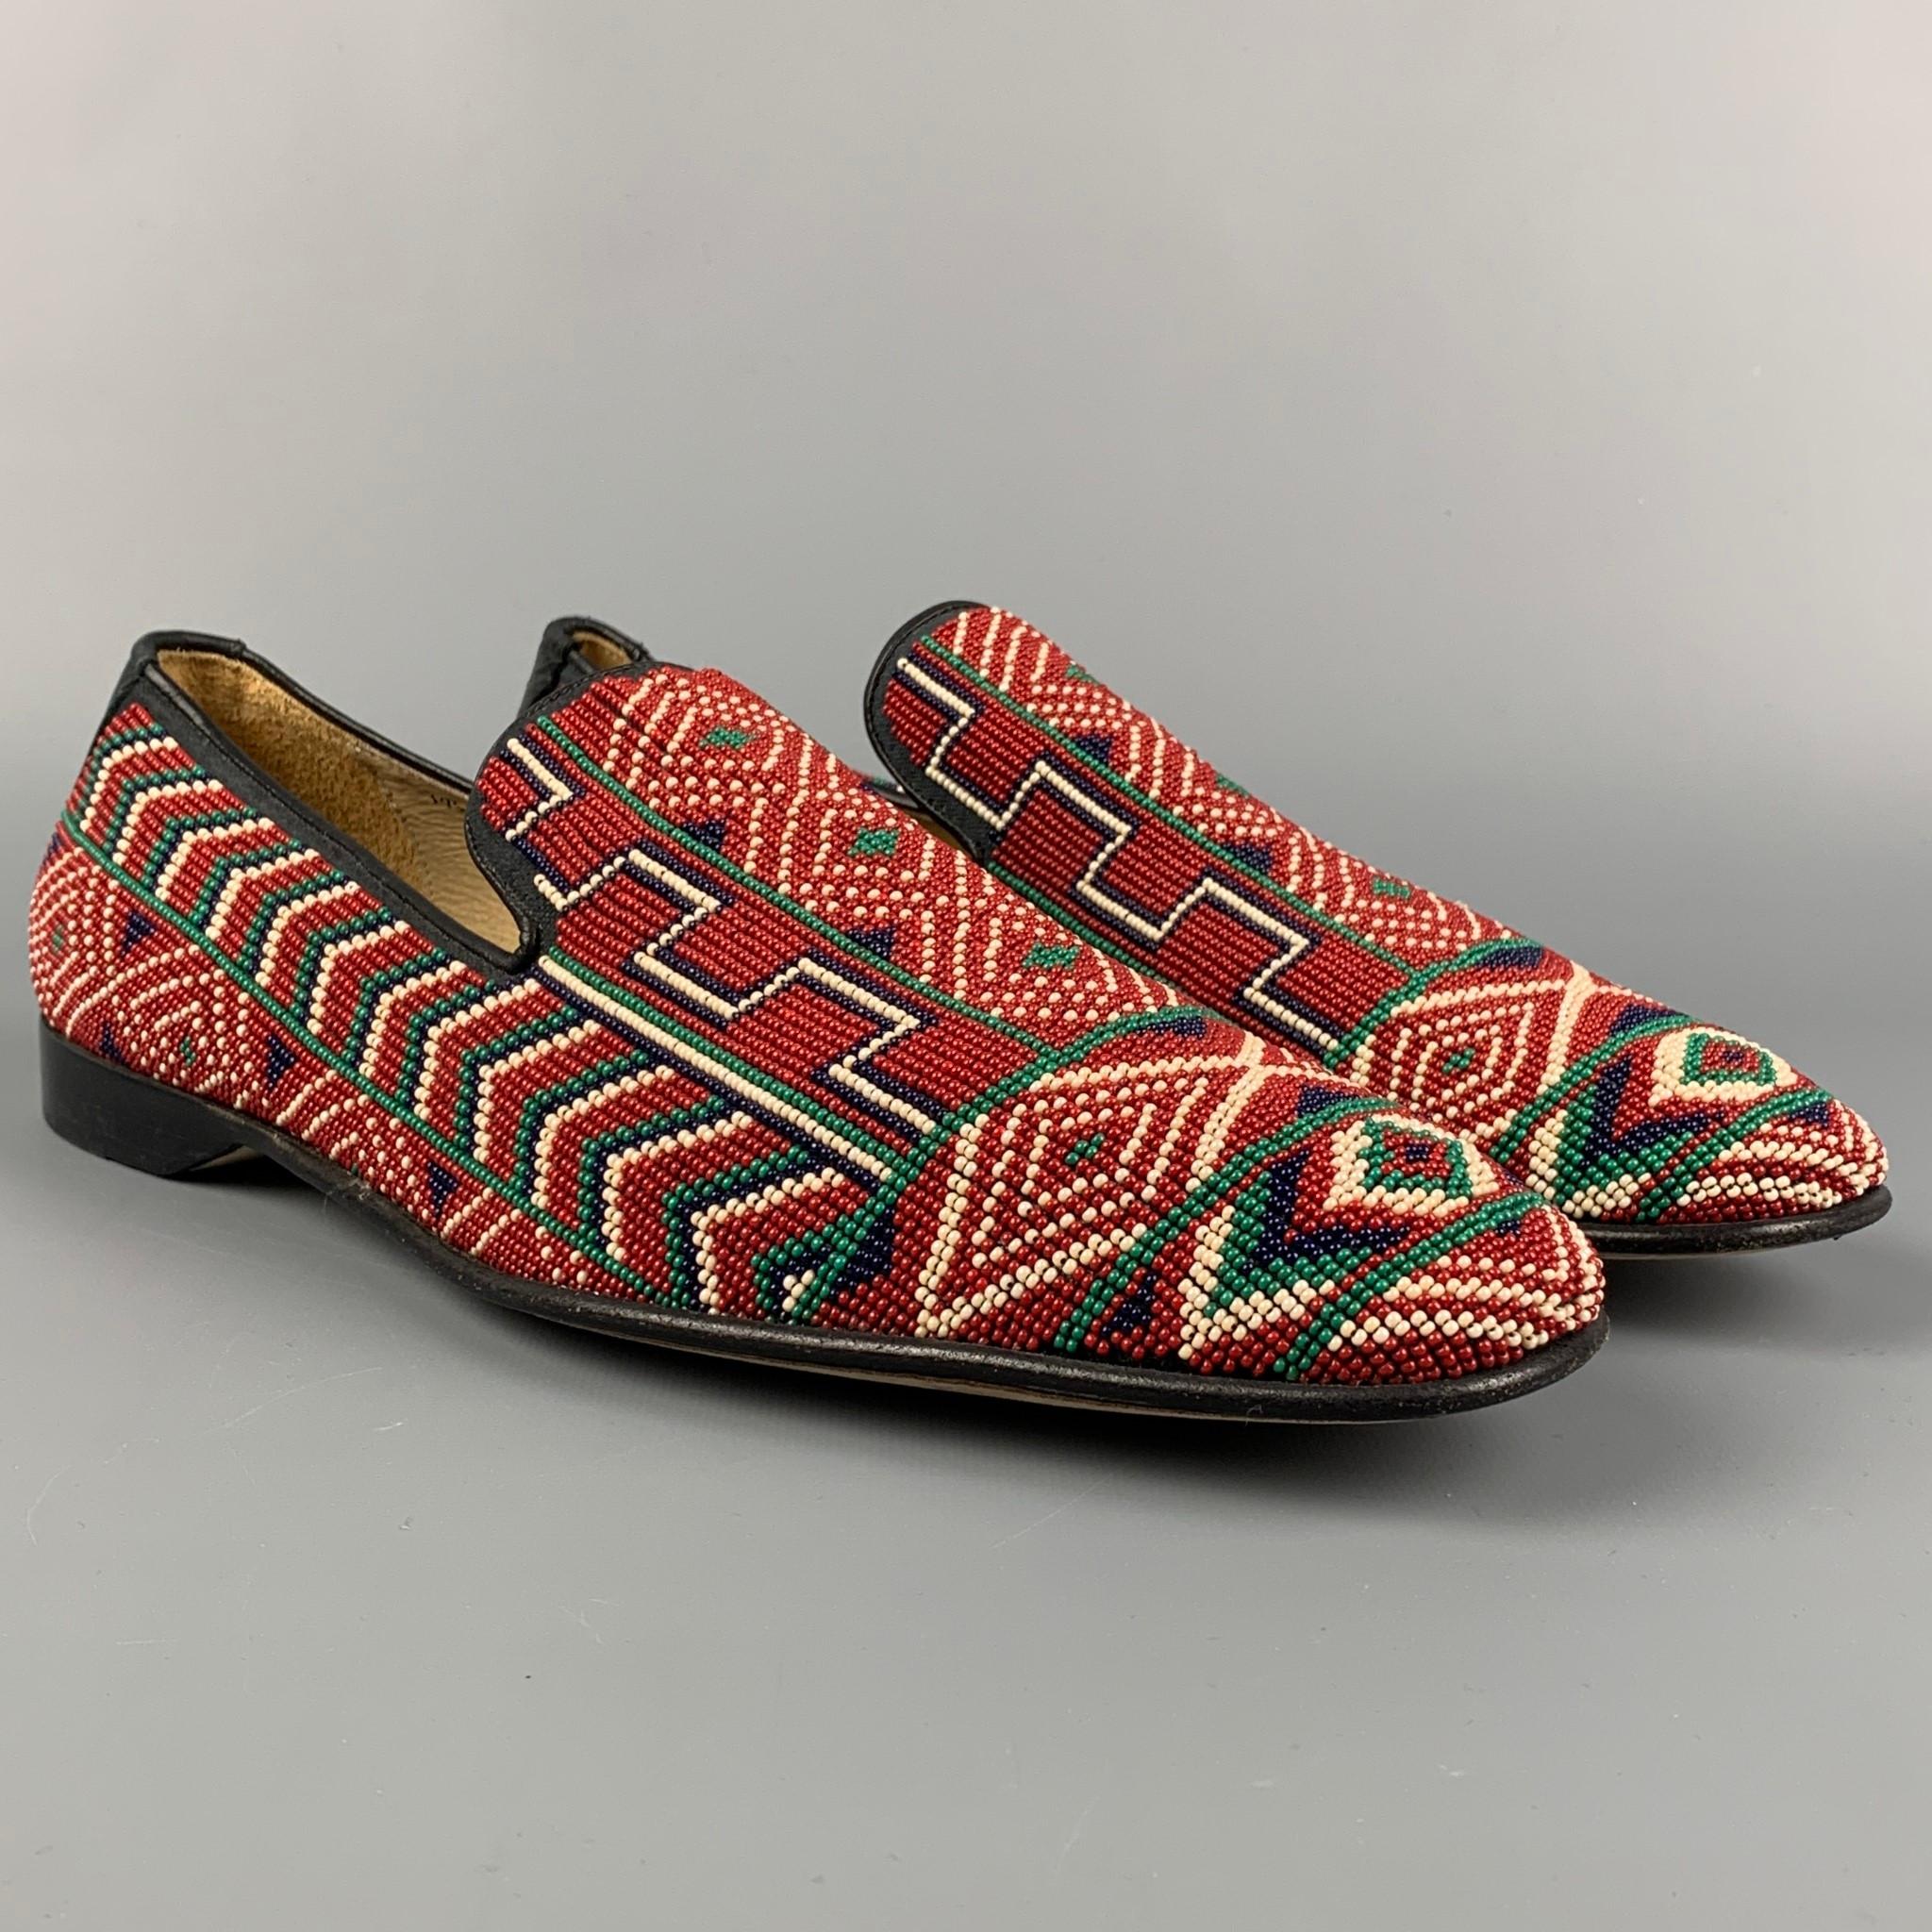 DONALD J PLINER loafers comes in a red beaded leather featuring a square toe and s slip on style. Made in Italy. 

Very Good Pre-Owned Condition.
Marked: 10.5 M PONTSP

Outsole: 12.5 in. x 4 in. 

 